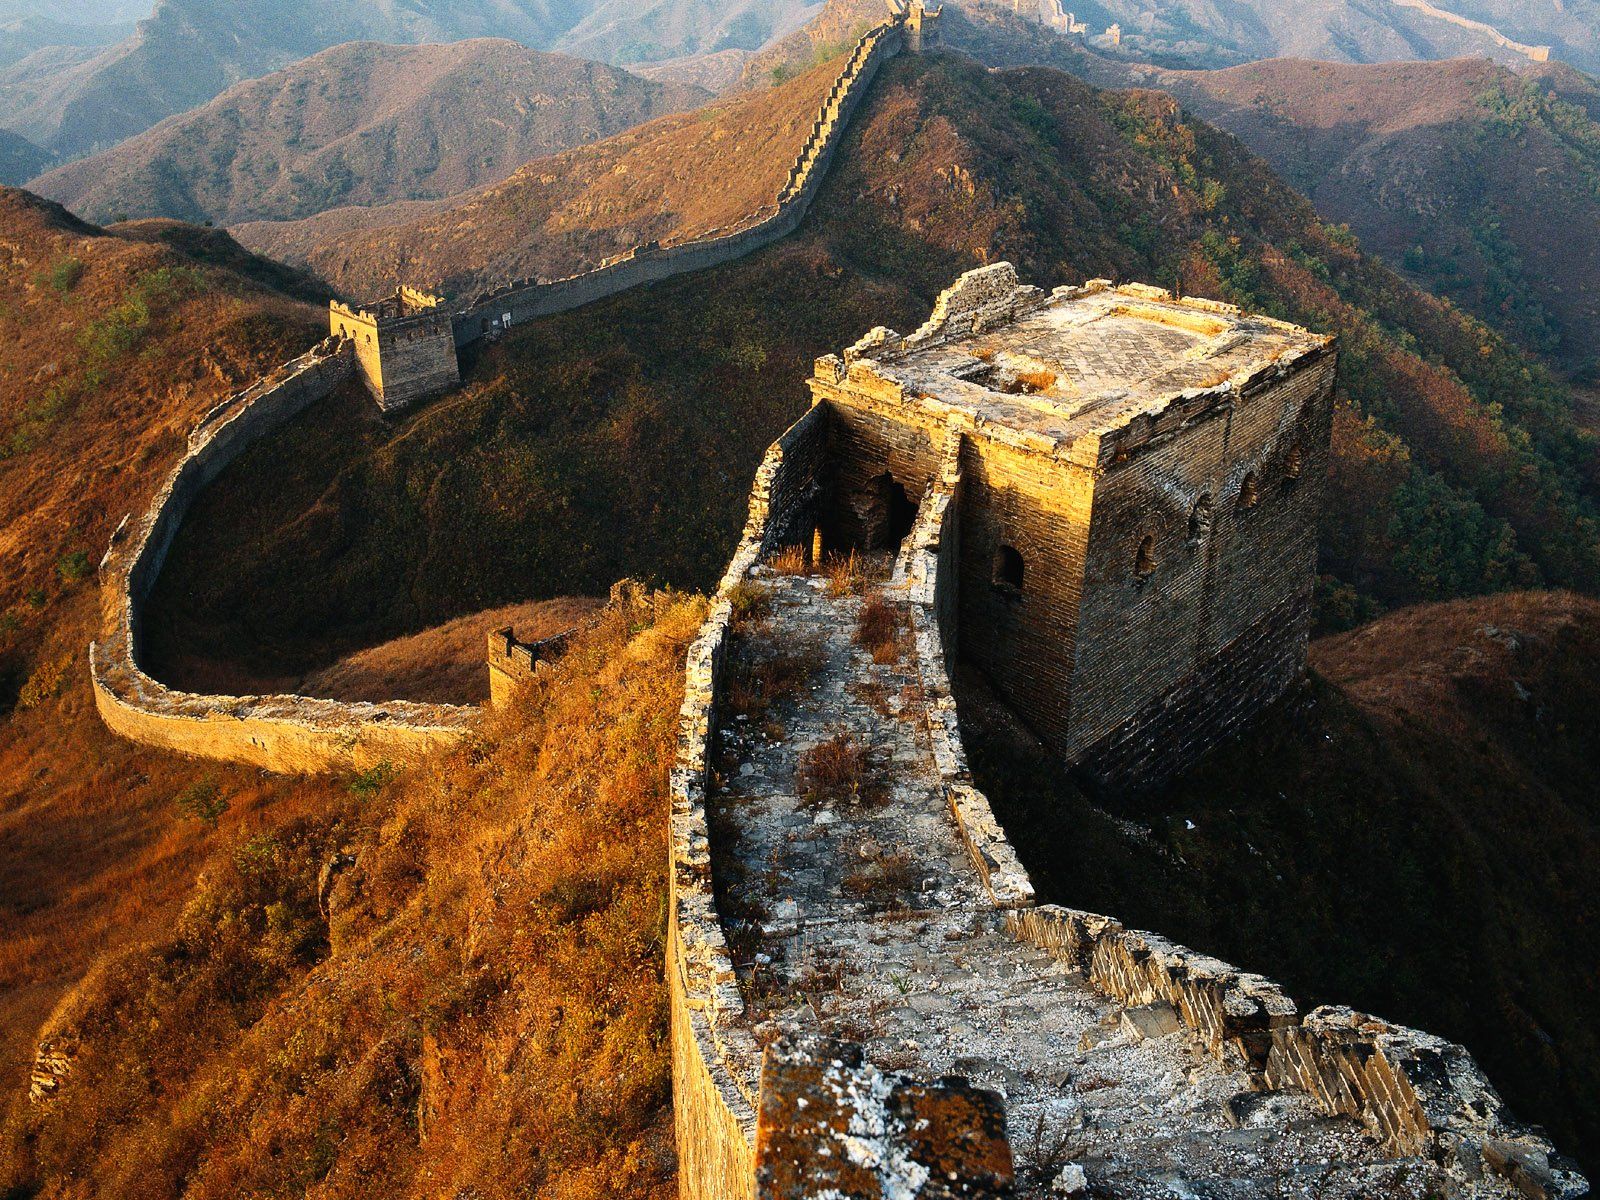 The Great Wall Of China Runs From Shanhaiguan In East To Lop